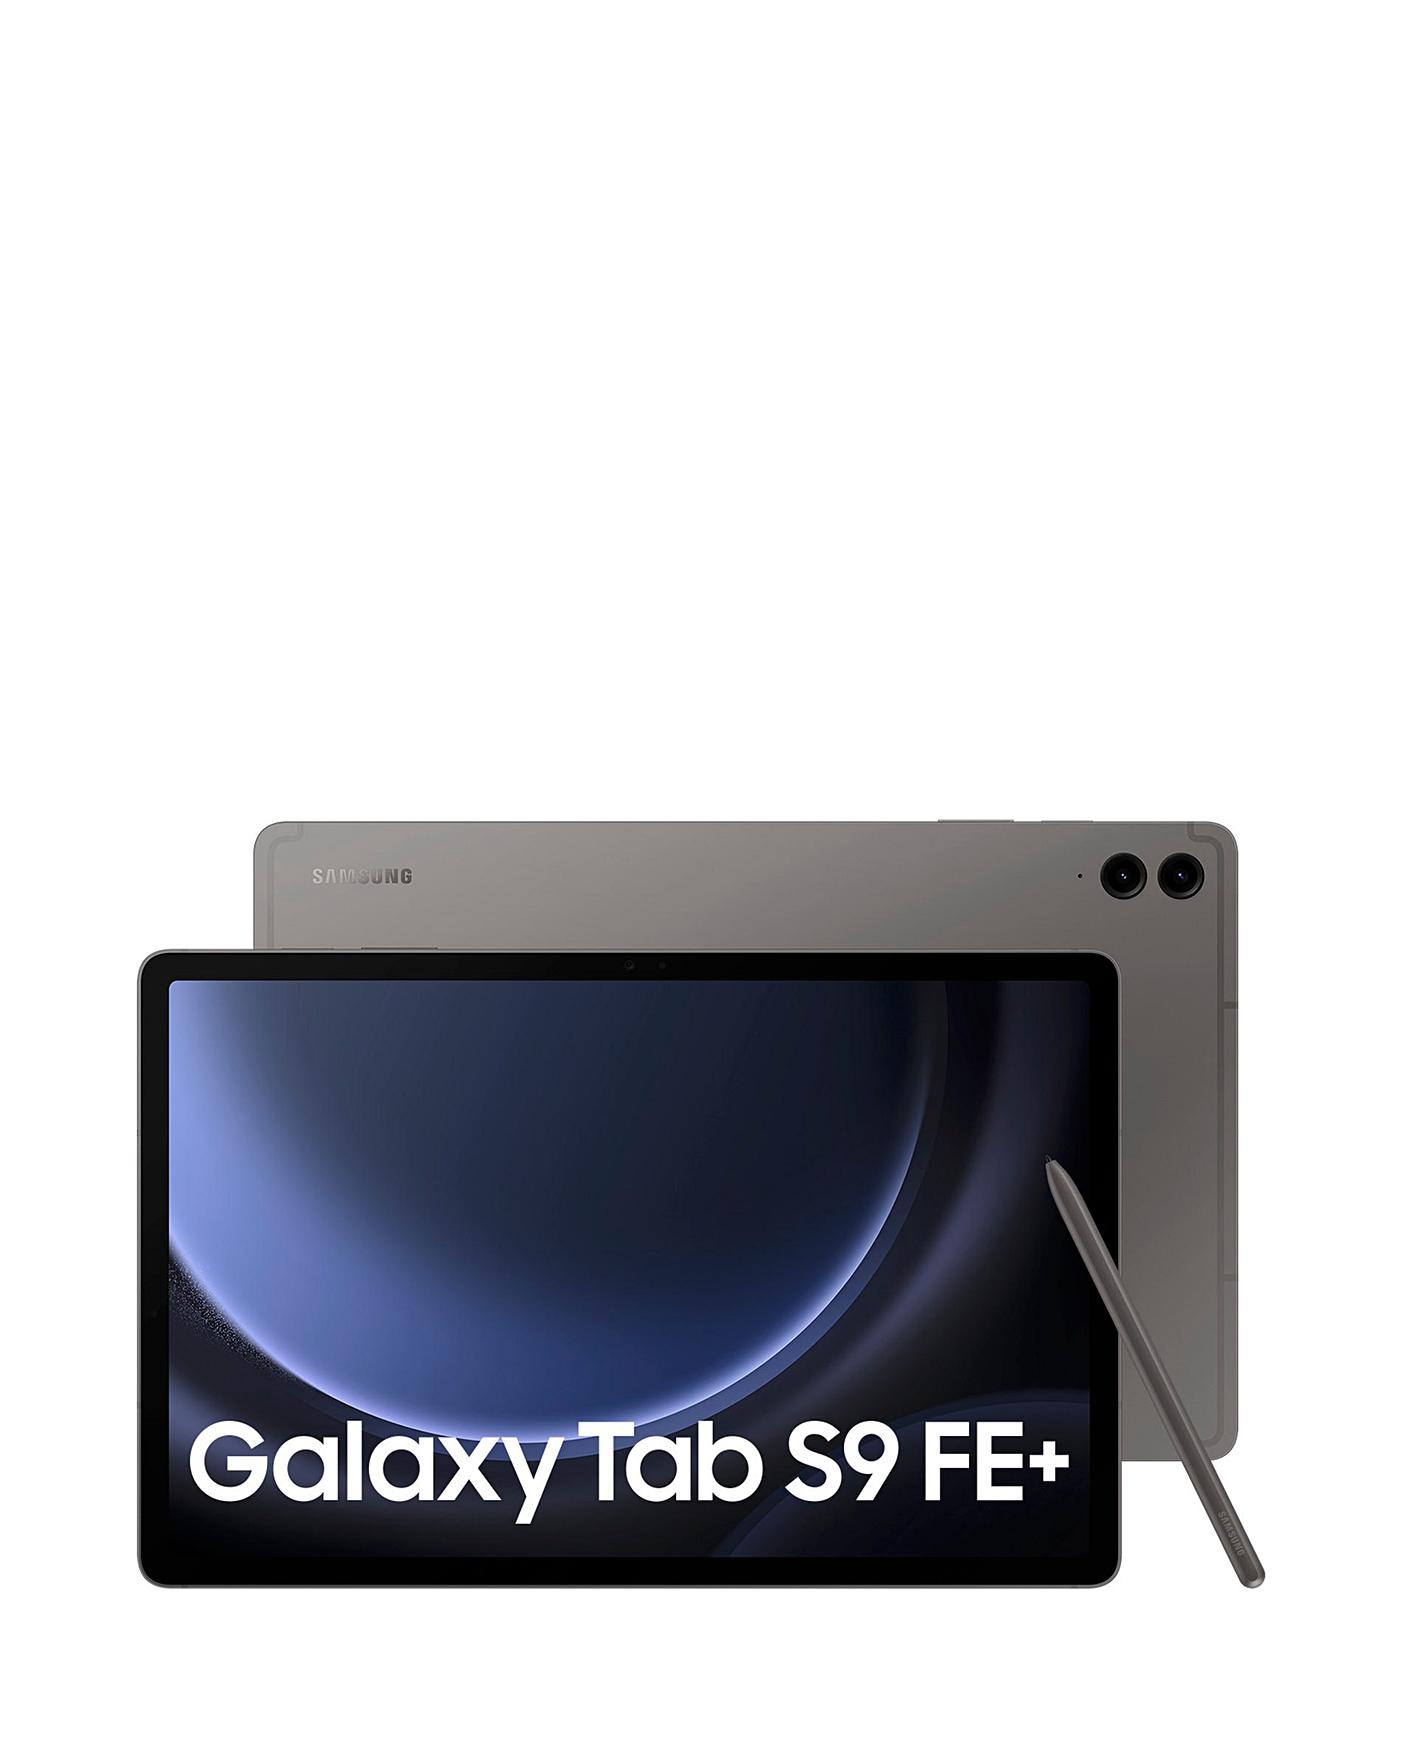 Samsung Galaxy Tab S9 FE surfaces with Wi-Fi and 5G variants confirmed -   News